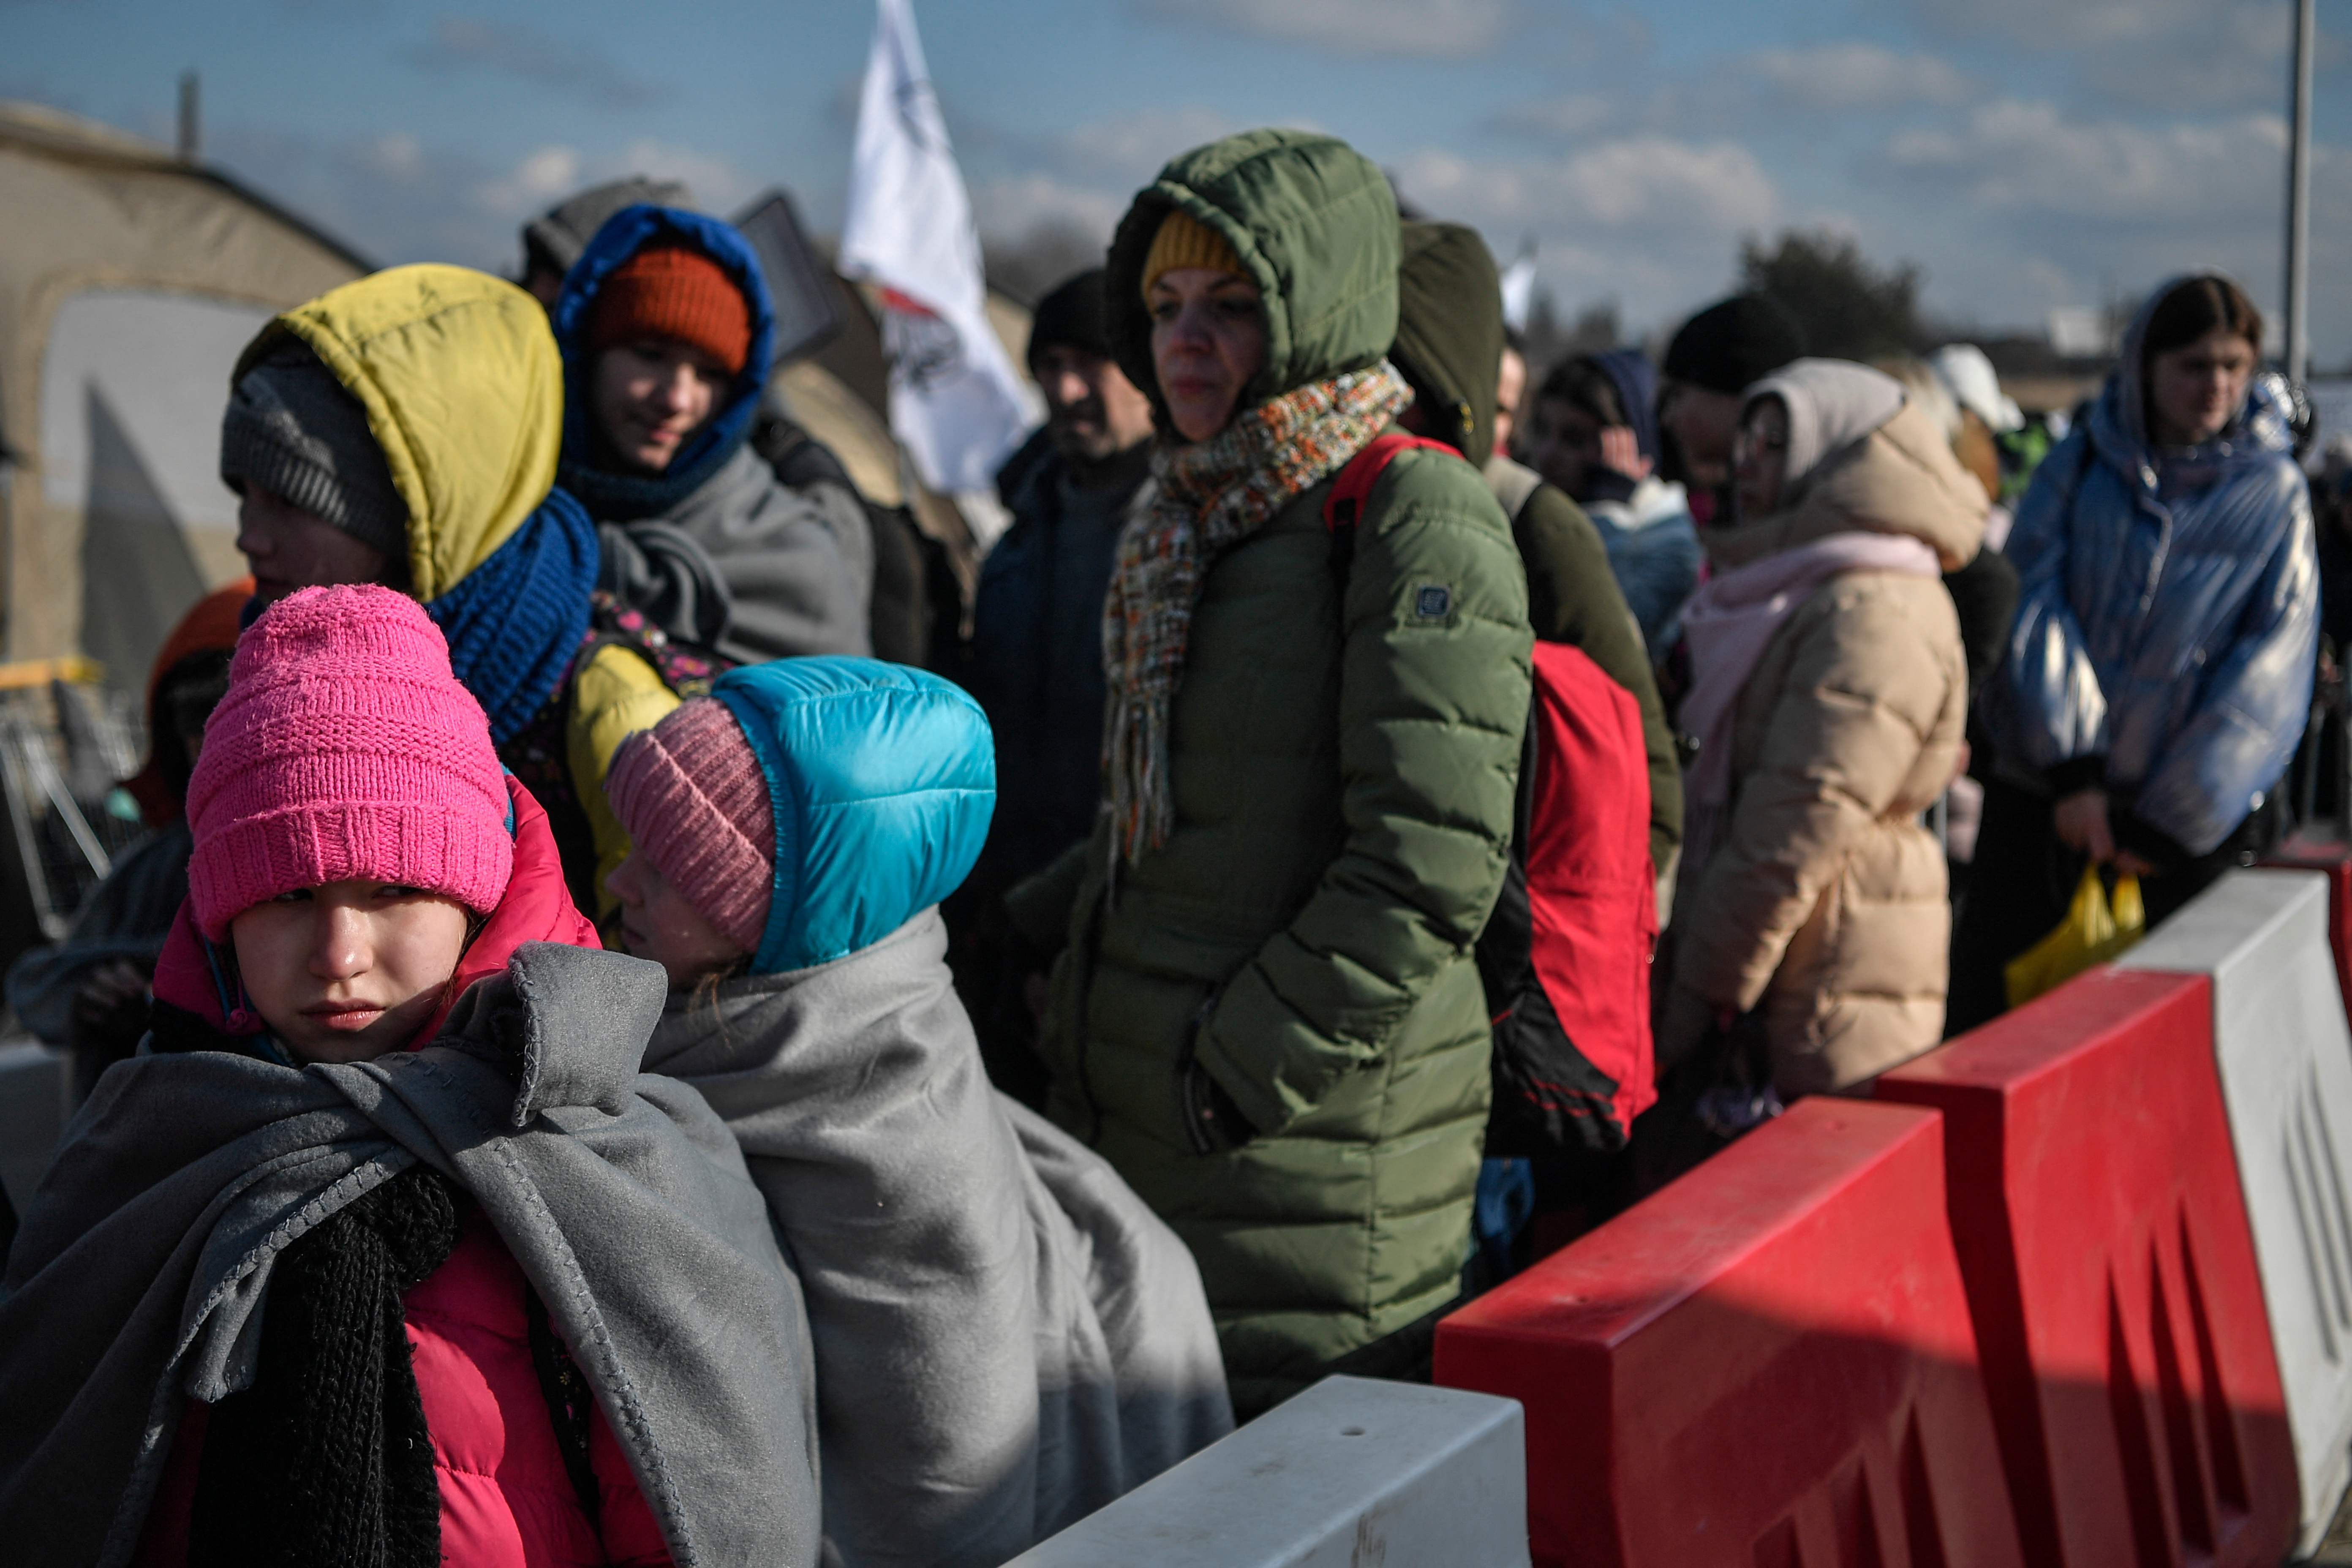 People wait to board buses after crossing the Ukrainian border into Poland, March 10, 2022